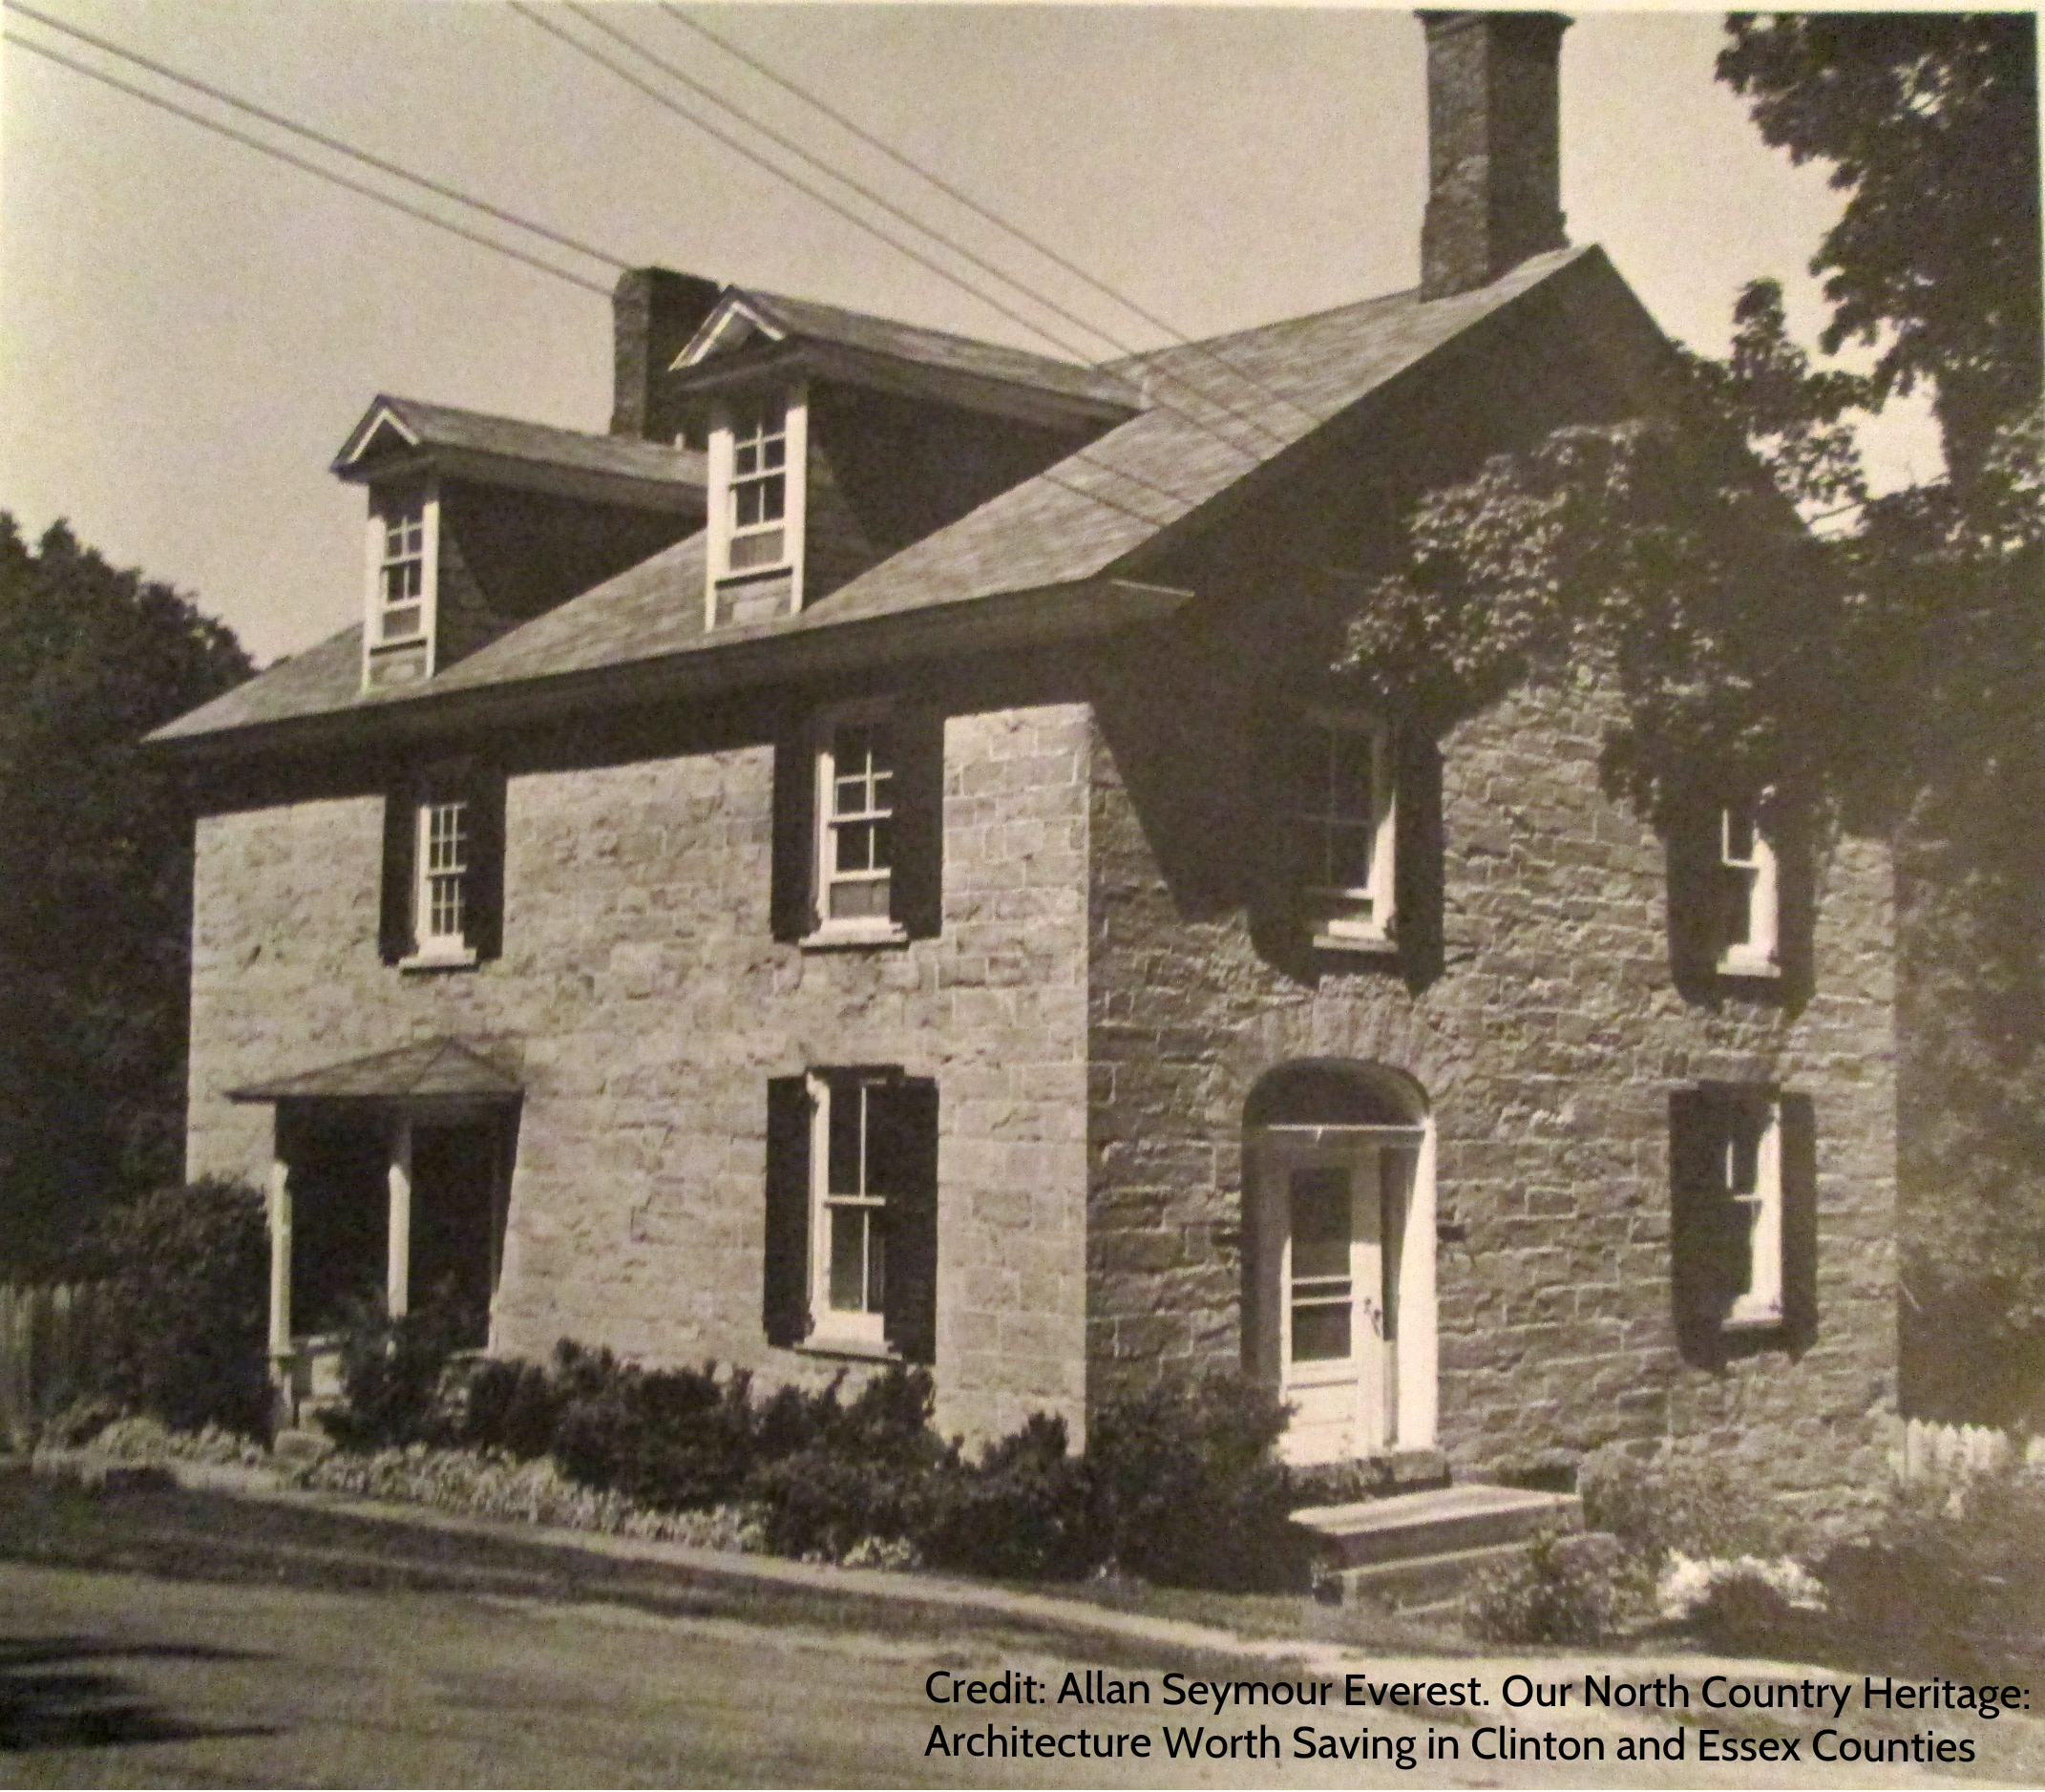 Dr. Samuel Shumway House, Essex, NY (Image Credit: Allan Seymour Everest. Our North Country Heritage: Architecture Worth Saving in Clinton and Essex Counties. 130)